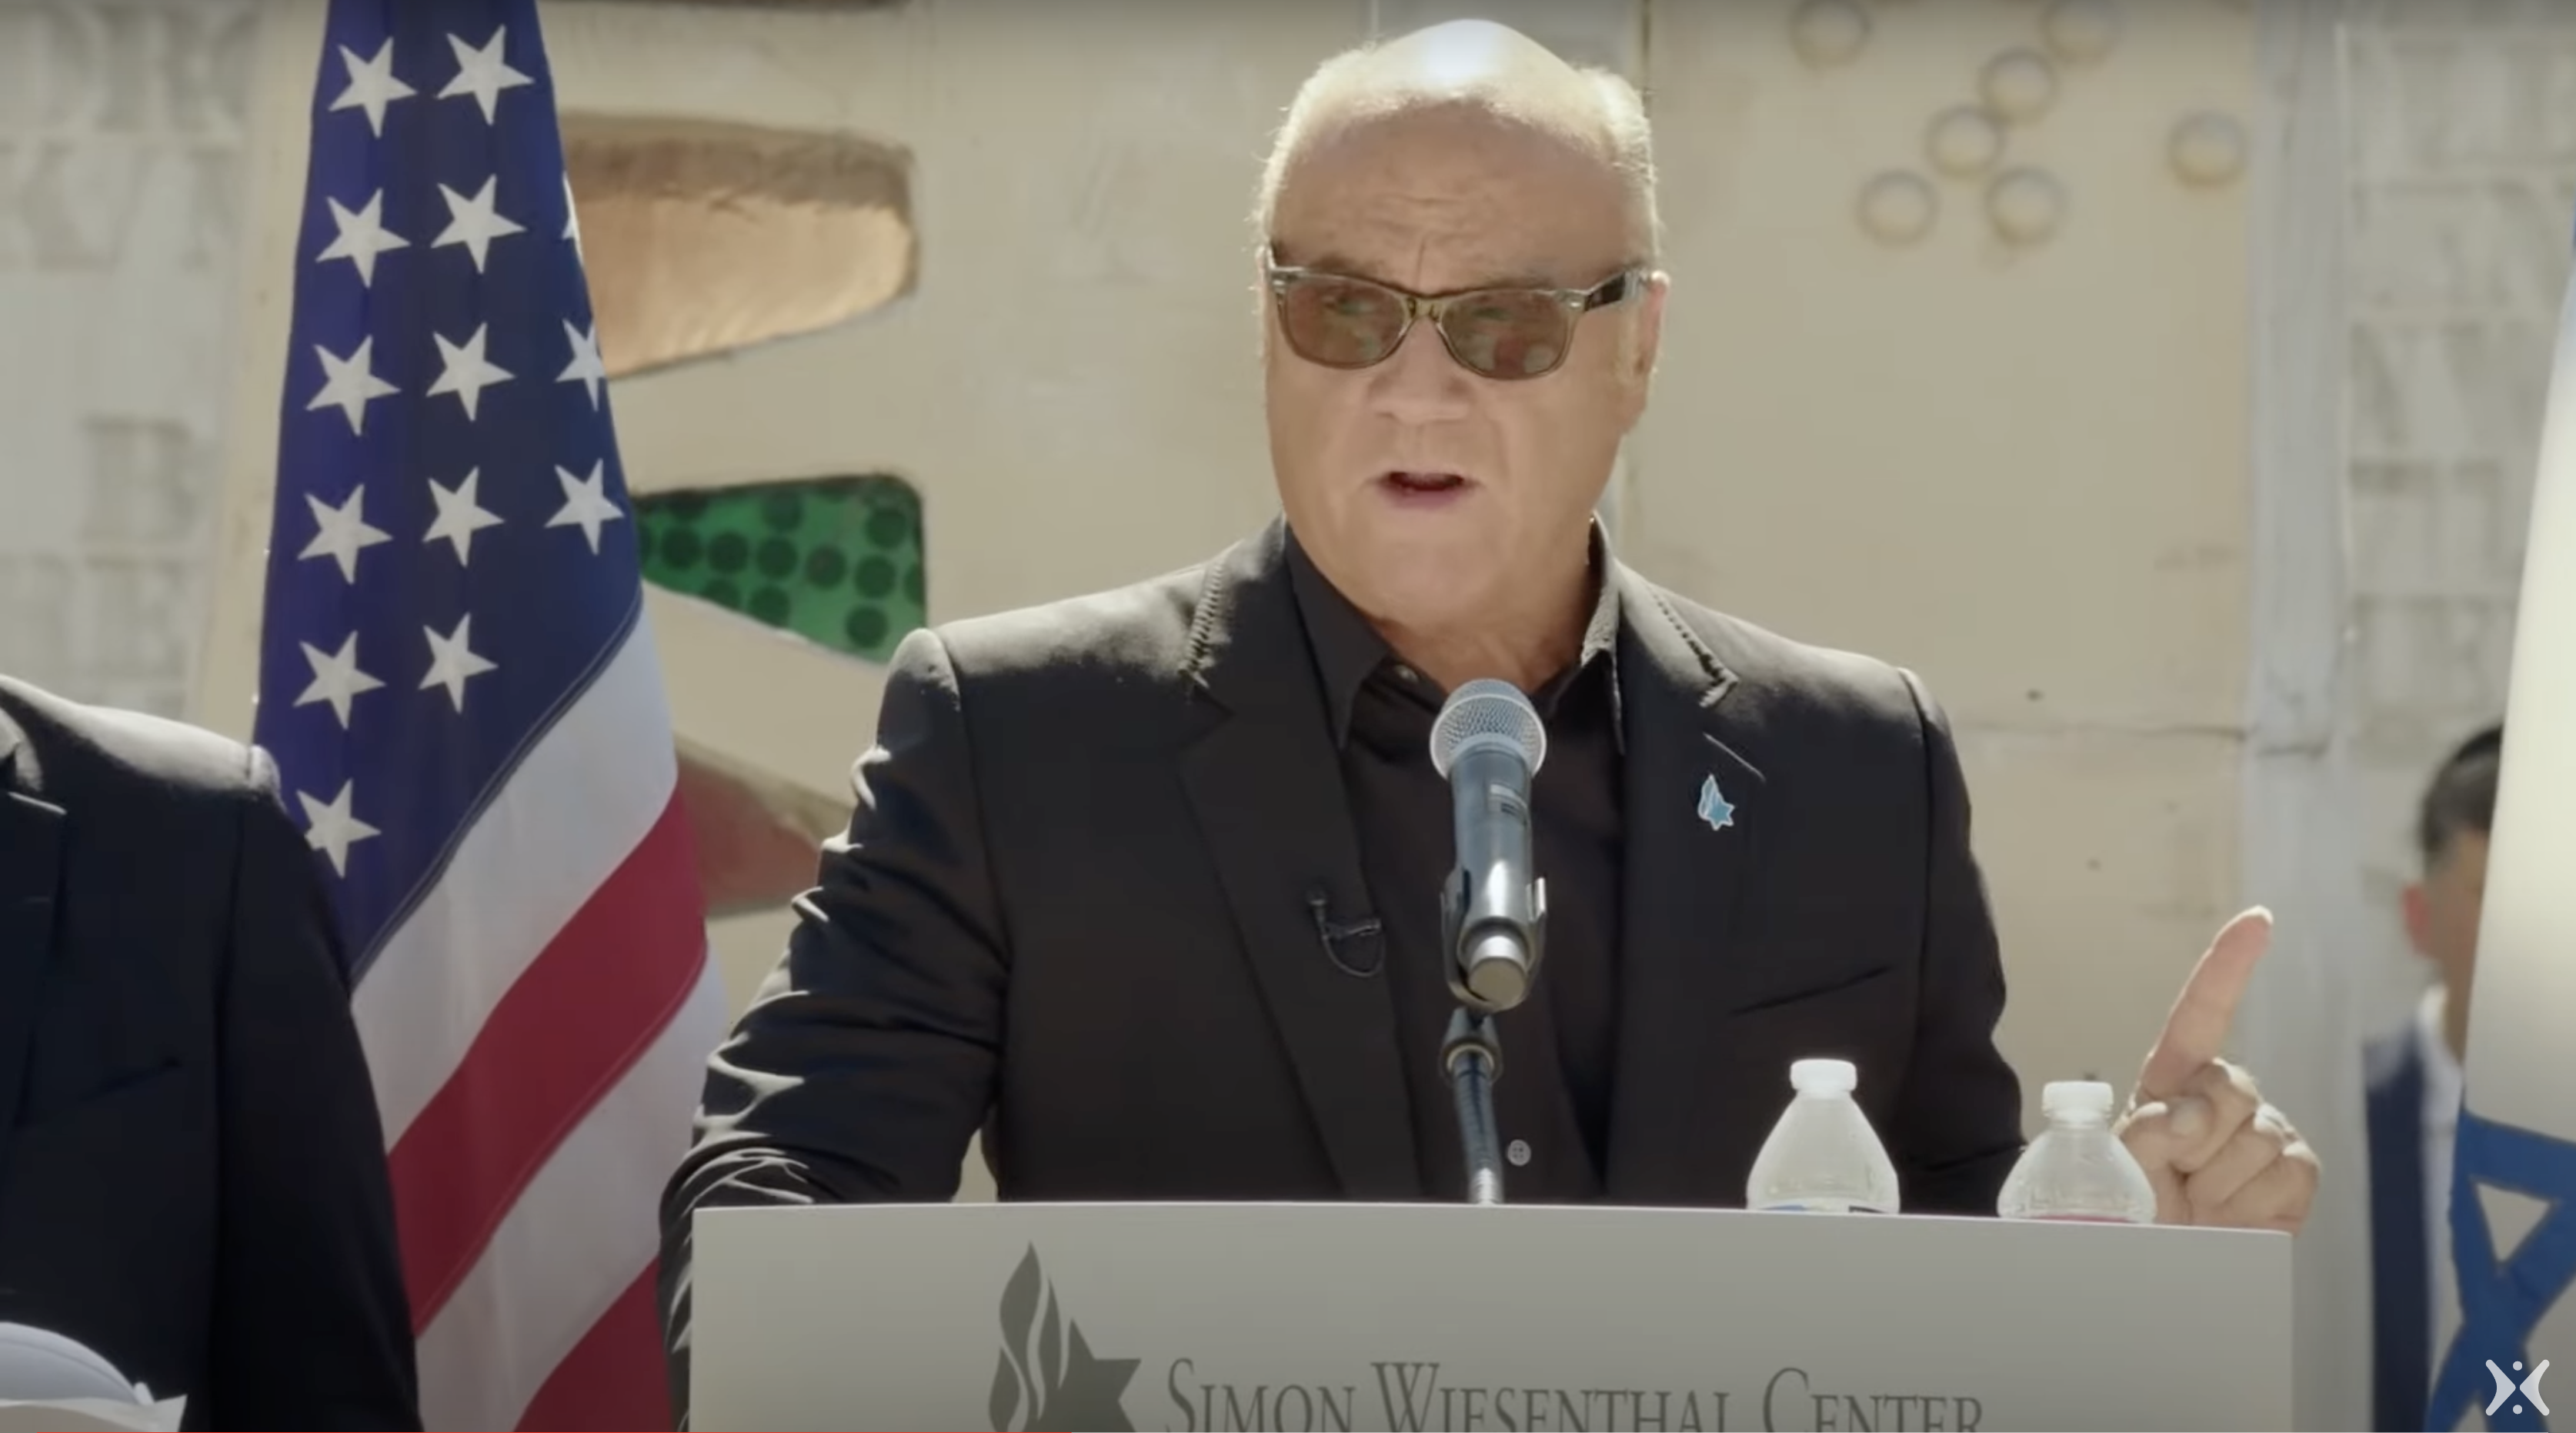 Pastor Greg Laurie speaking at the Simon Wiesenthal Center during the rally for Israel